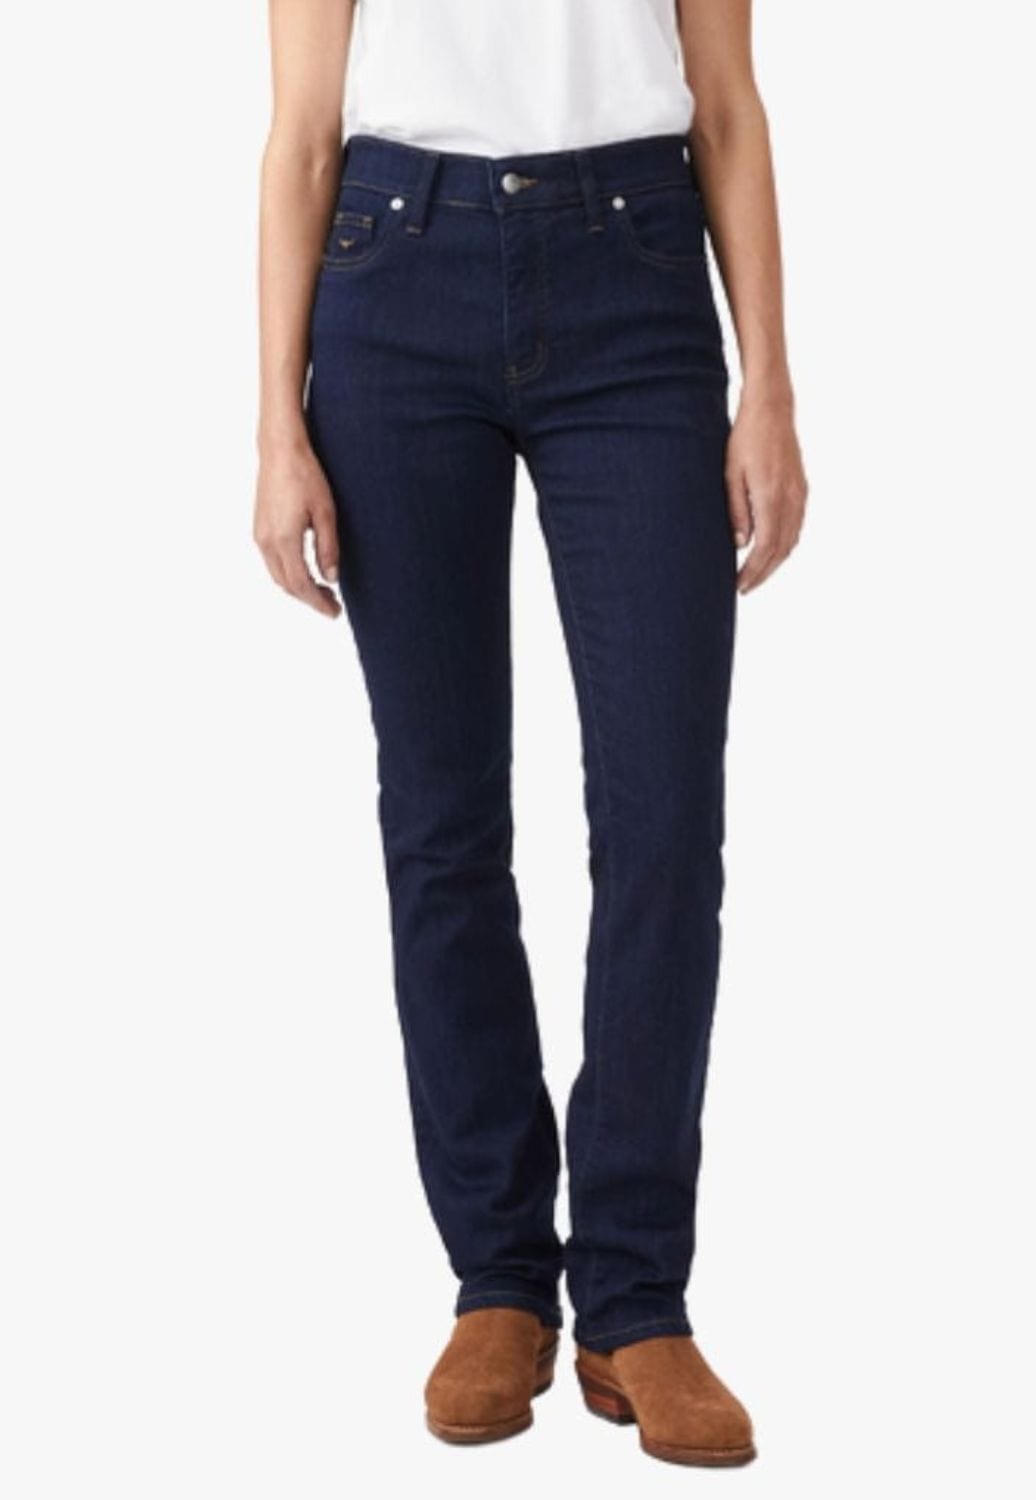 R.M. Williams CLOTHING-Womens Jeans R.M. Williams Womens Meredith Jeans